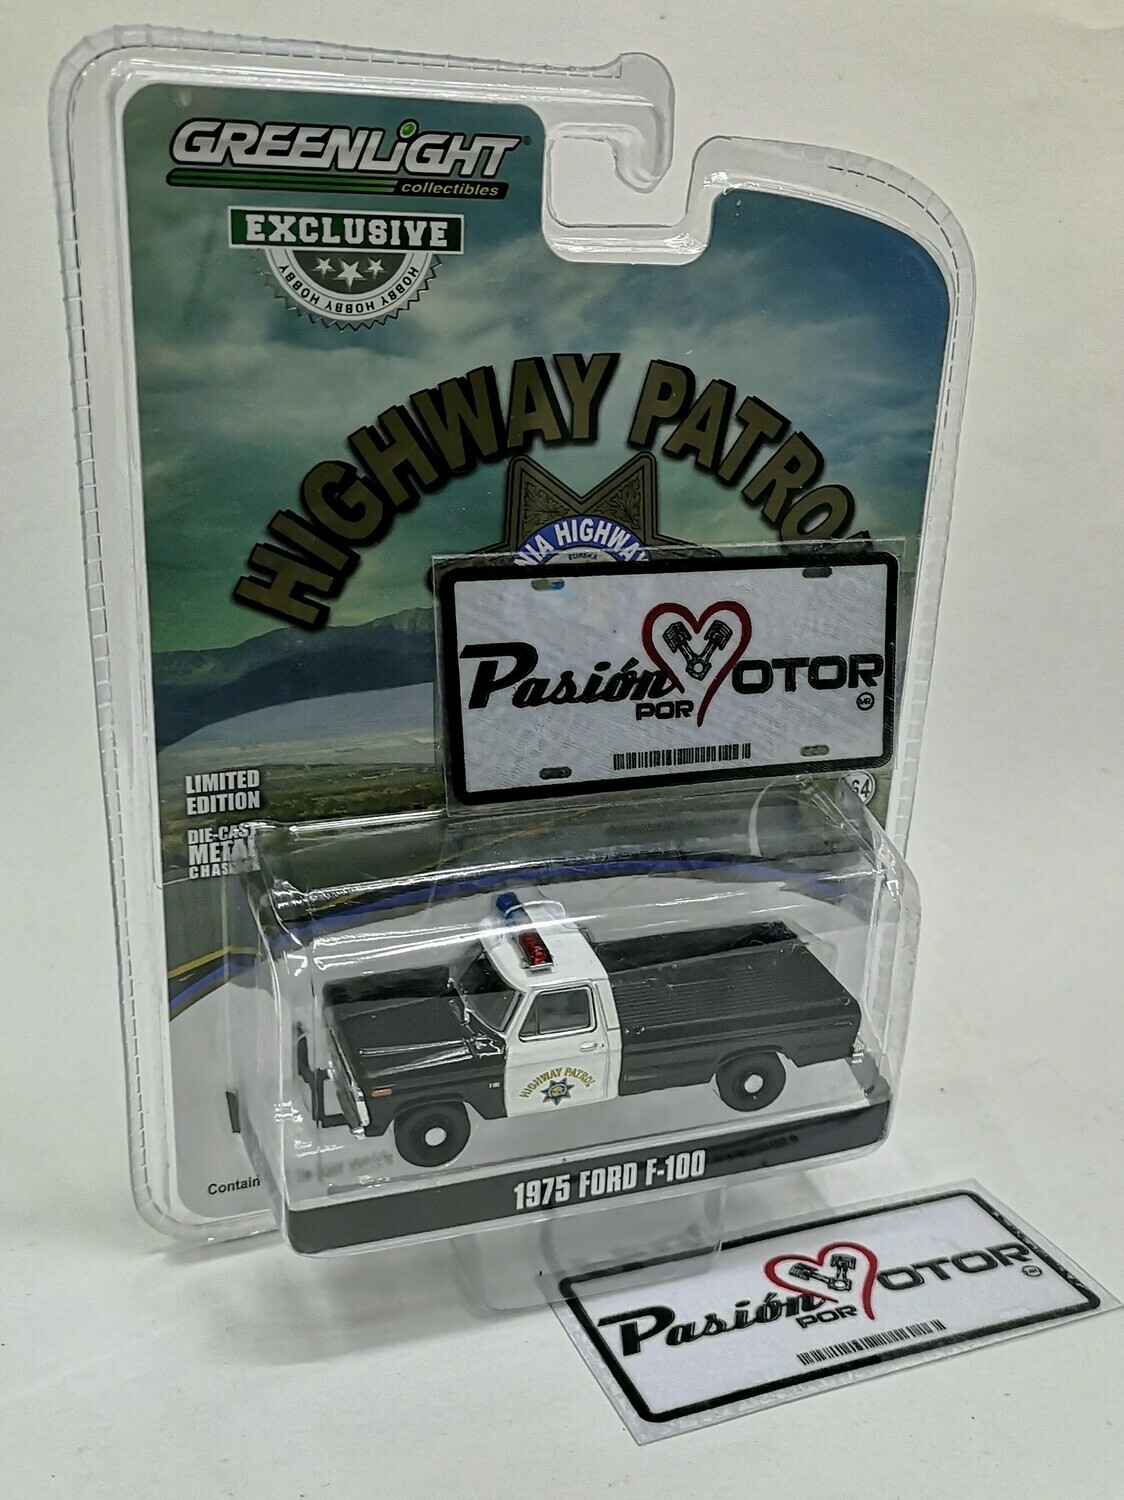 1:64 Ford F-100 Pick Up 1975 California Highway Patrol Patrulla Policia Greenlight Hobby Exclusive